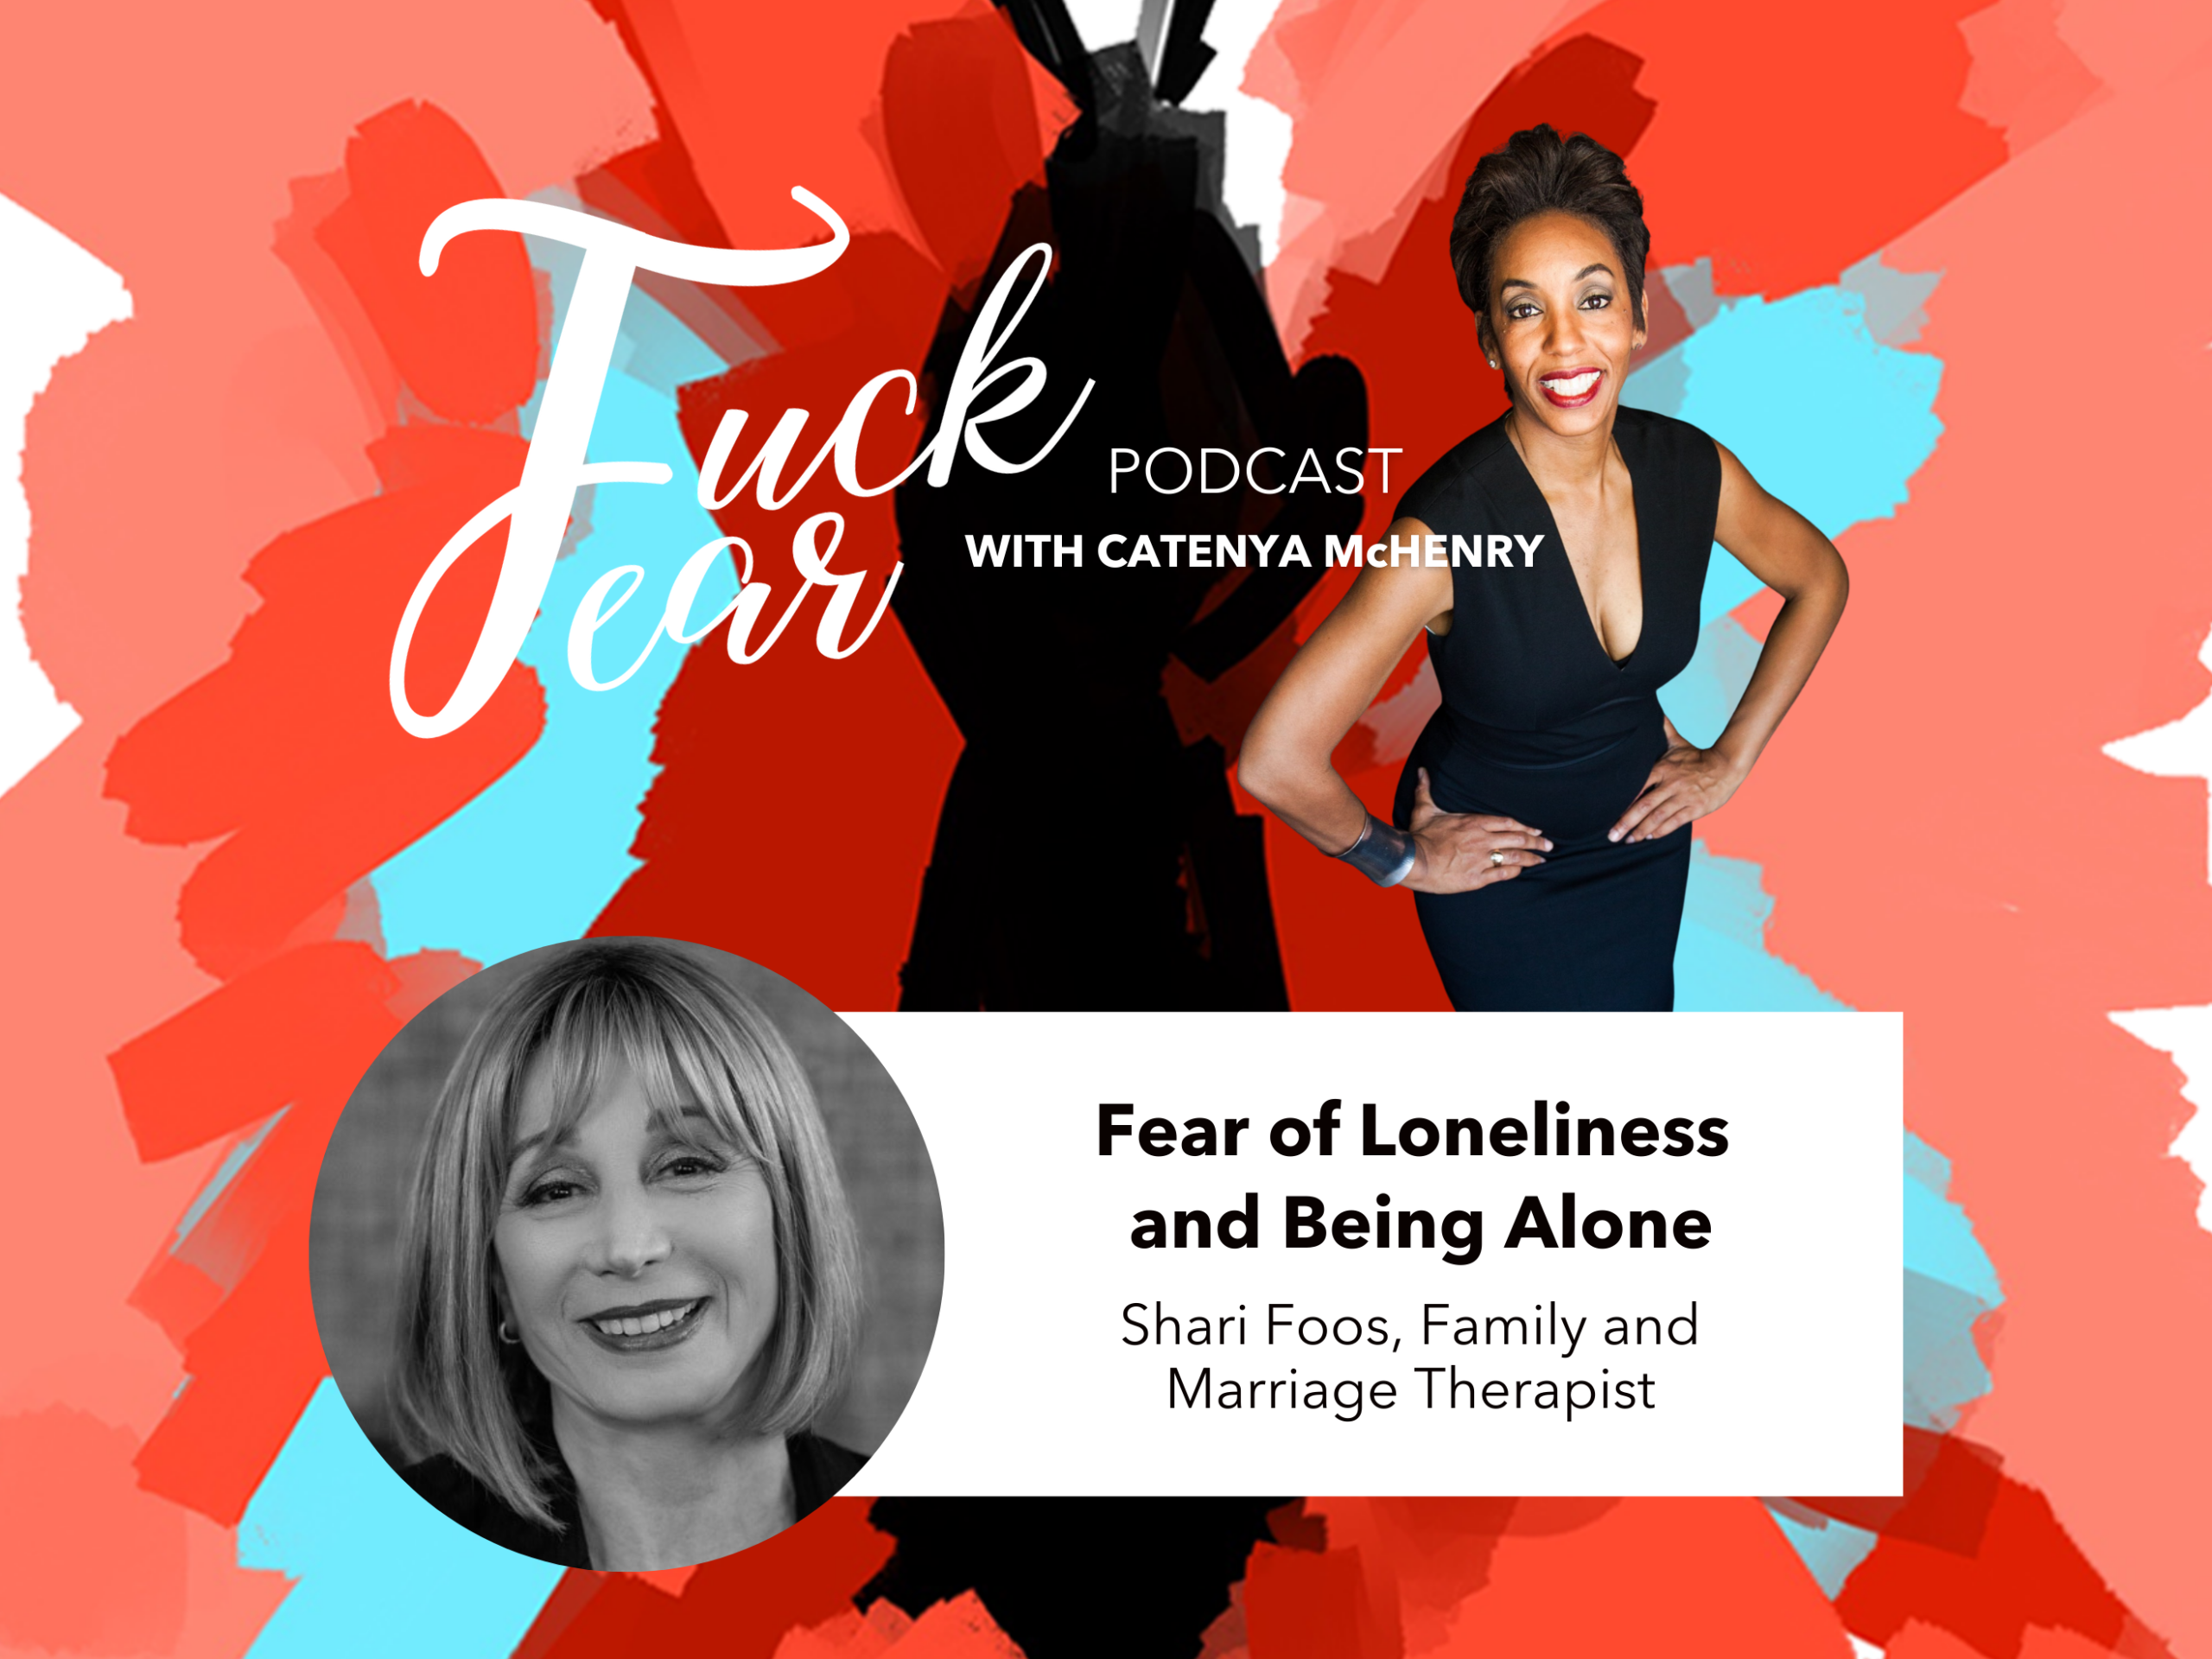 Fear of Loneliness and Being Alone on the Fuck Fear podcast with Catenya McHenry and guest Shari Foos of The Narrative Method